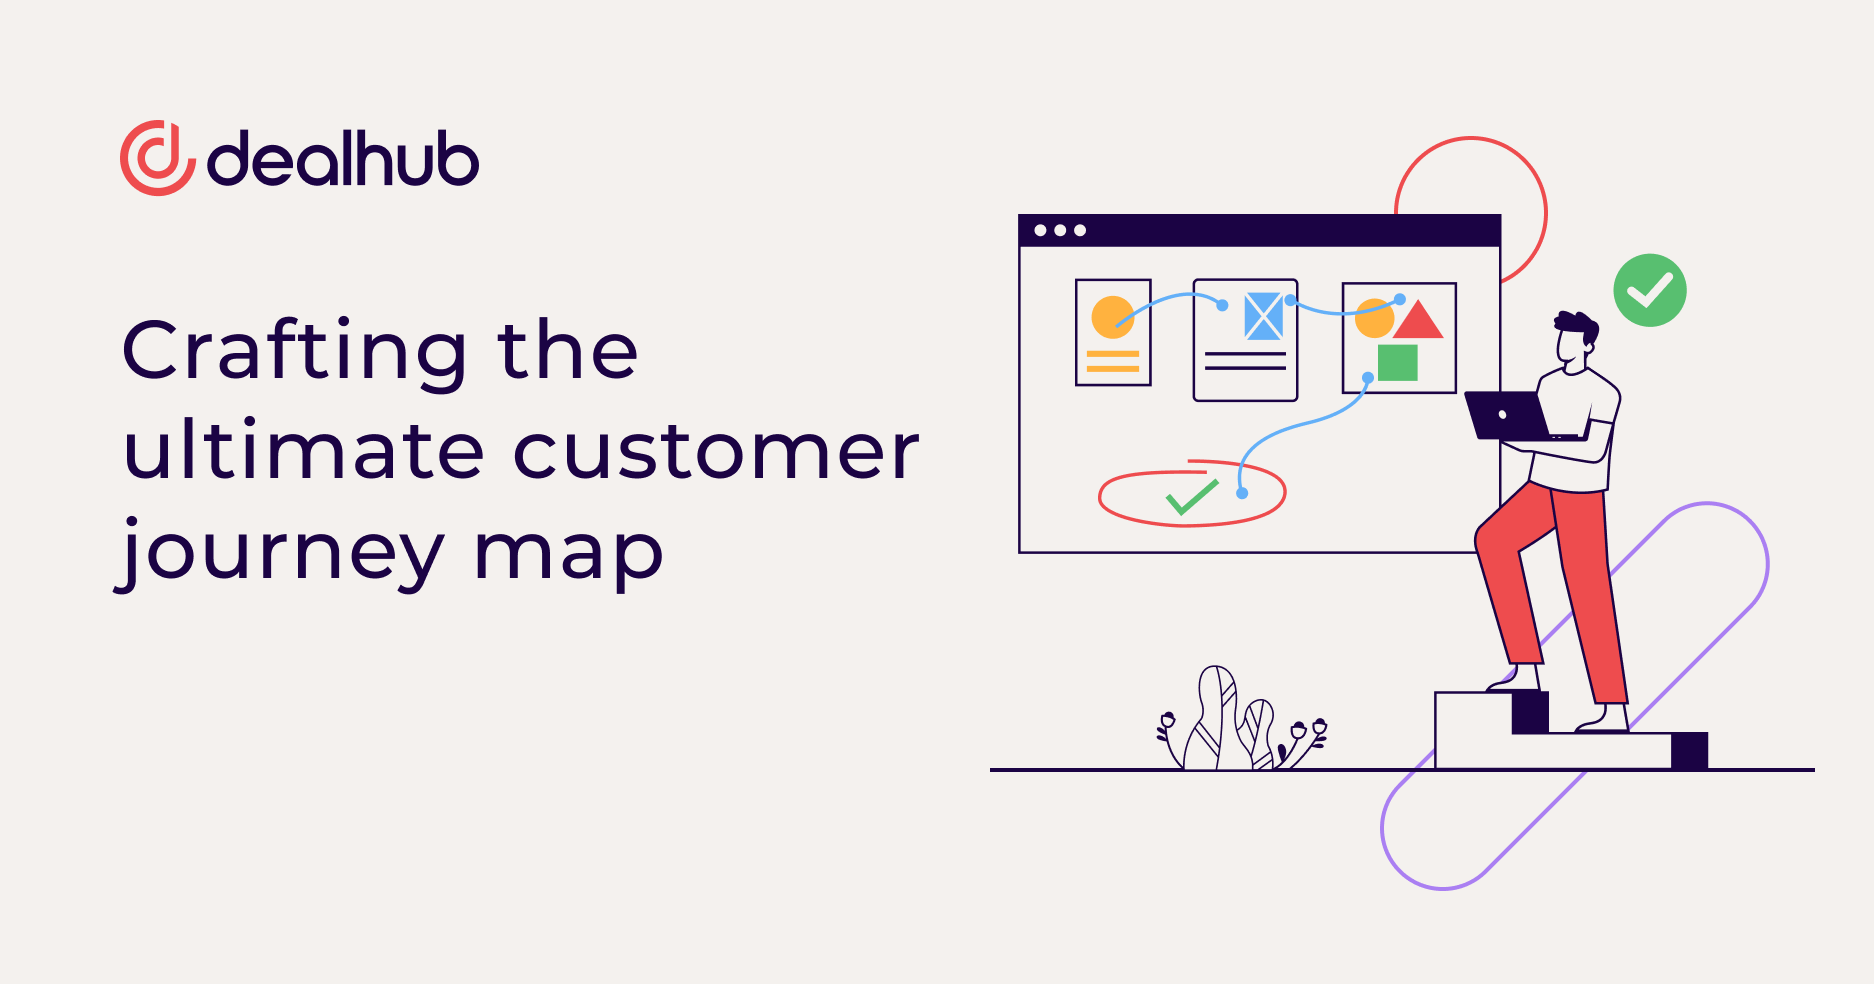 Crafting the ultimate customer journey map